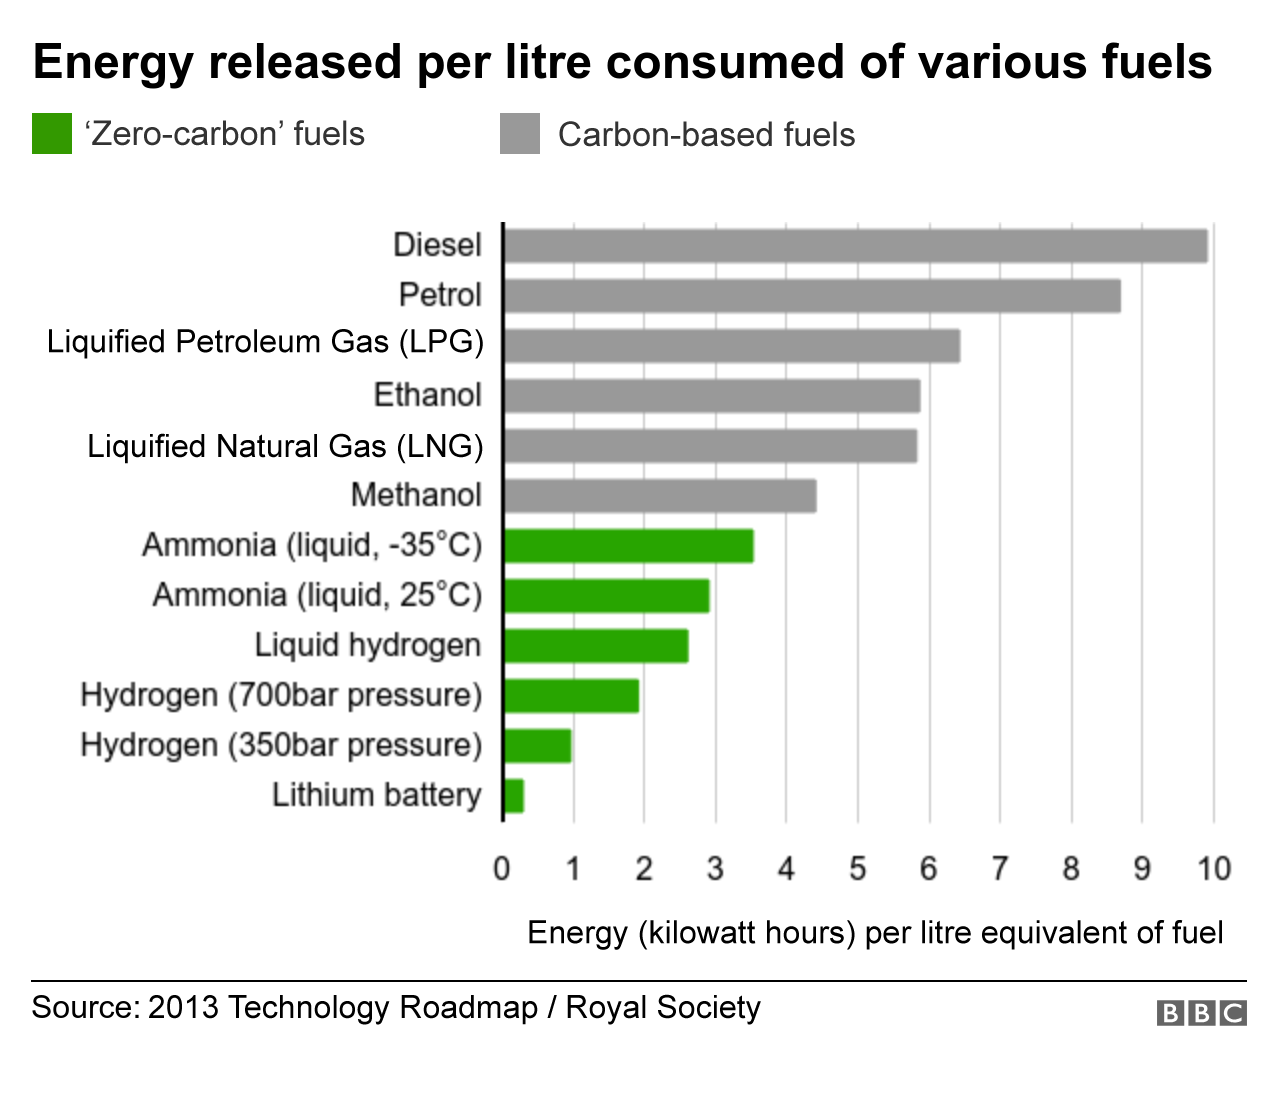 Graph of energy released per litre consumed of various fuels